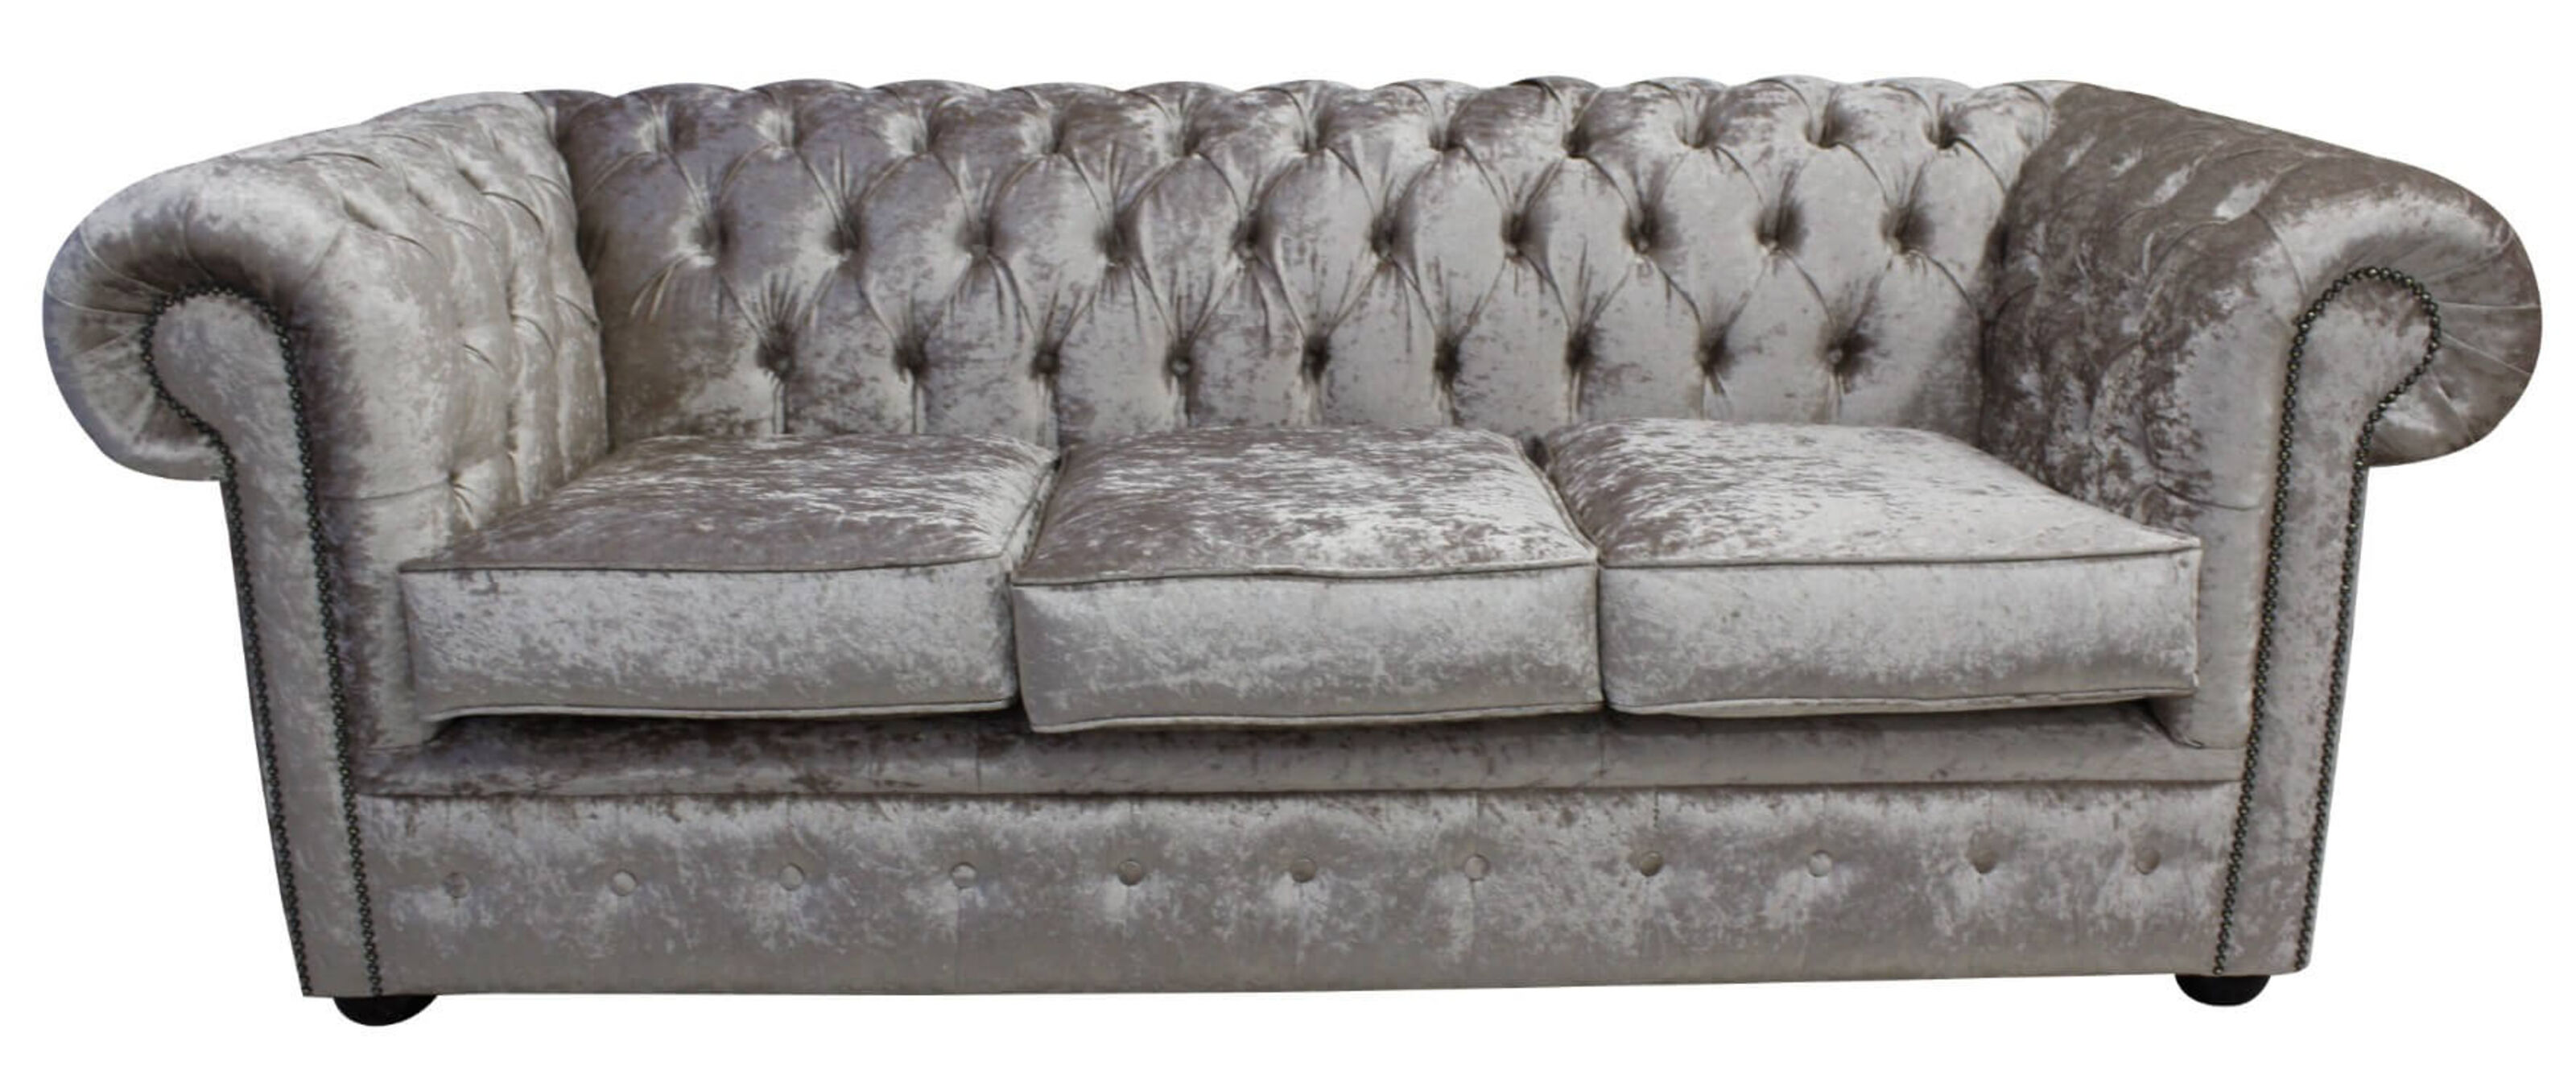 Find Your Perfect Chesterfield Sofa in Johor Bahru  %Post Title